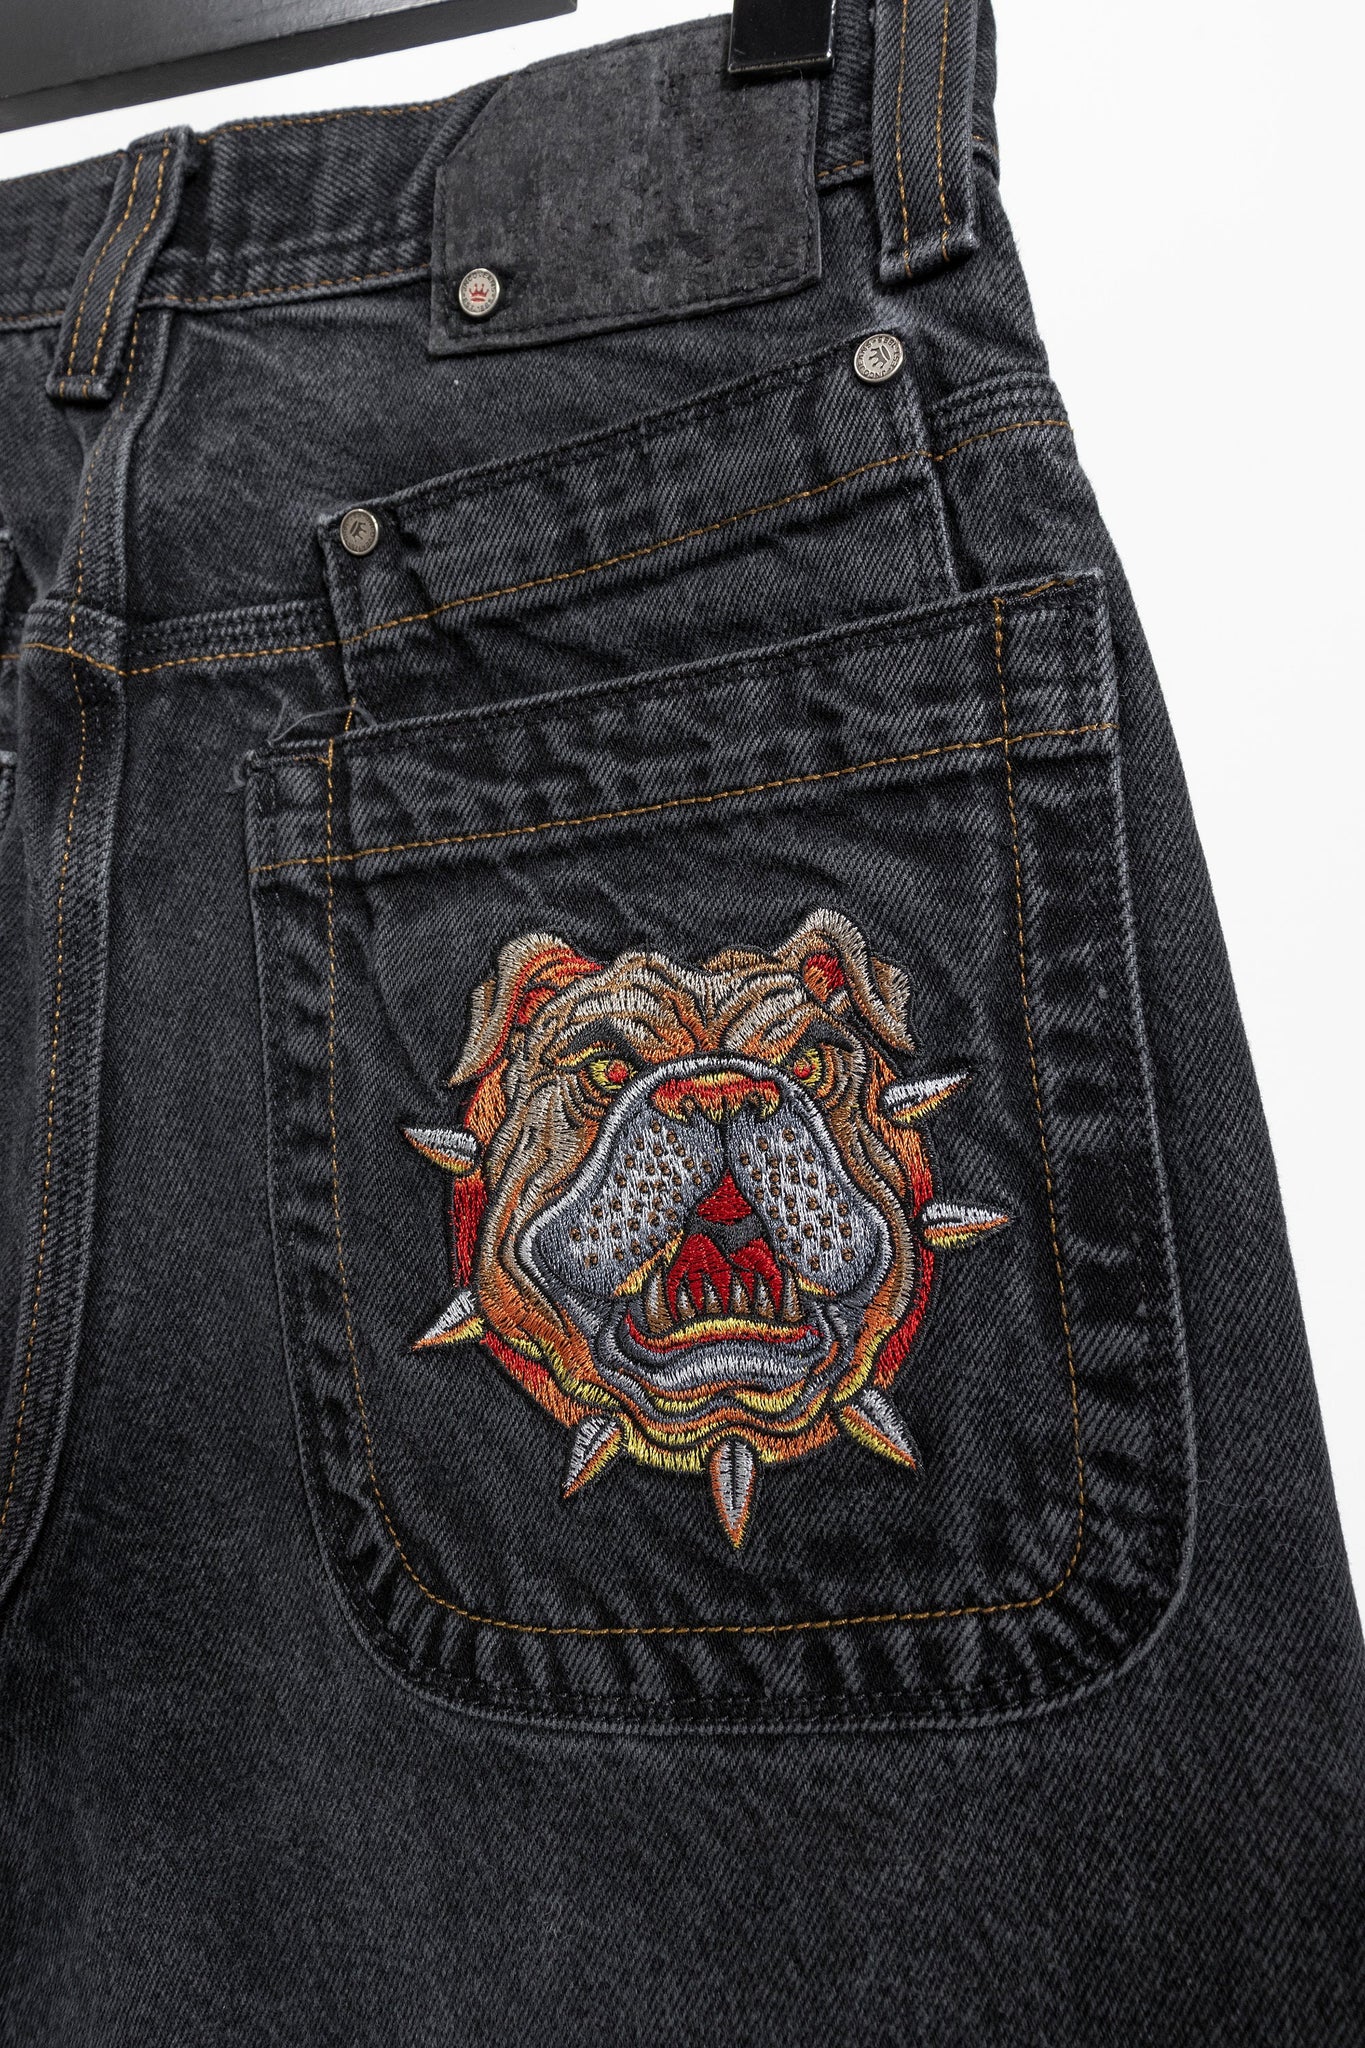 JNCO Jeans